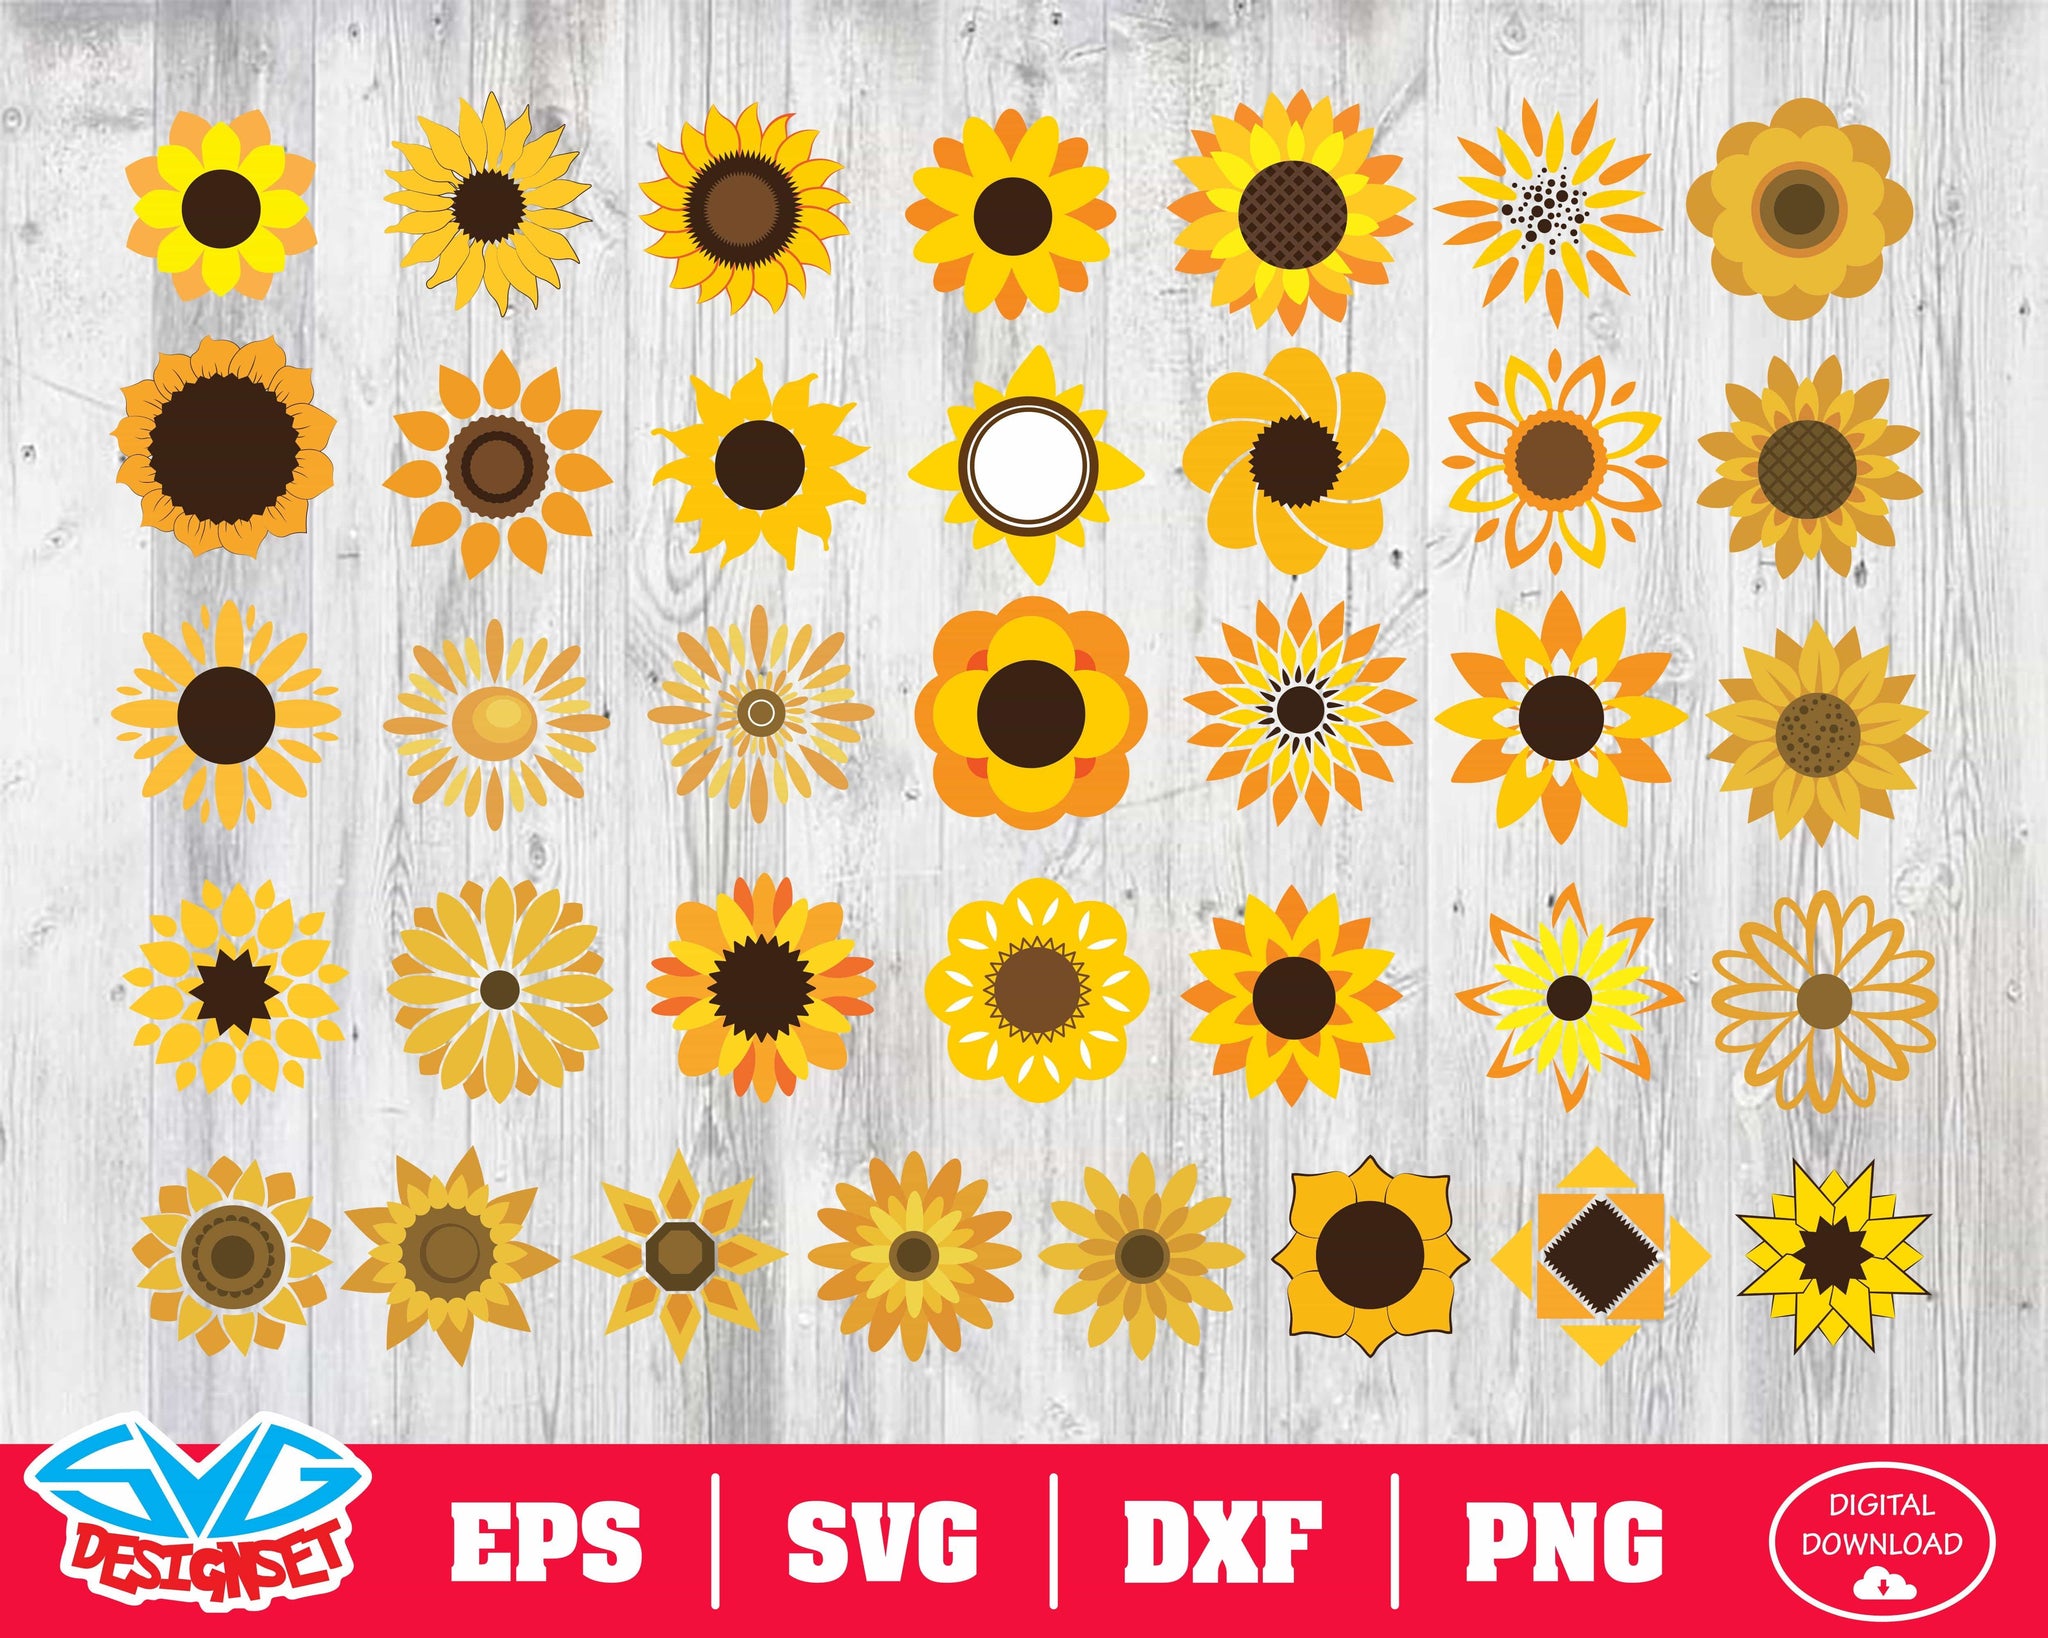 Sunflower Svg, Dxf, Eps, Png, Clipart, Silhouette and Cutfiles - SVGDesignSets